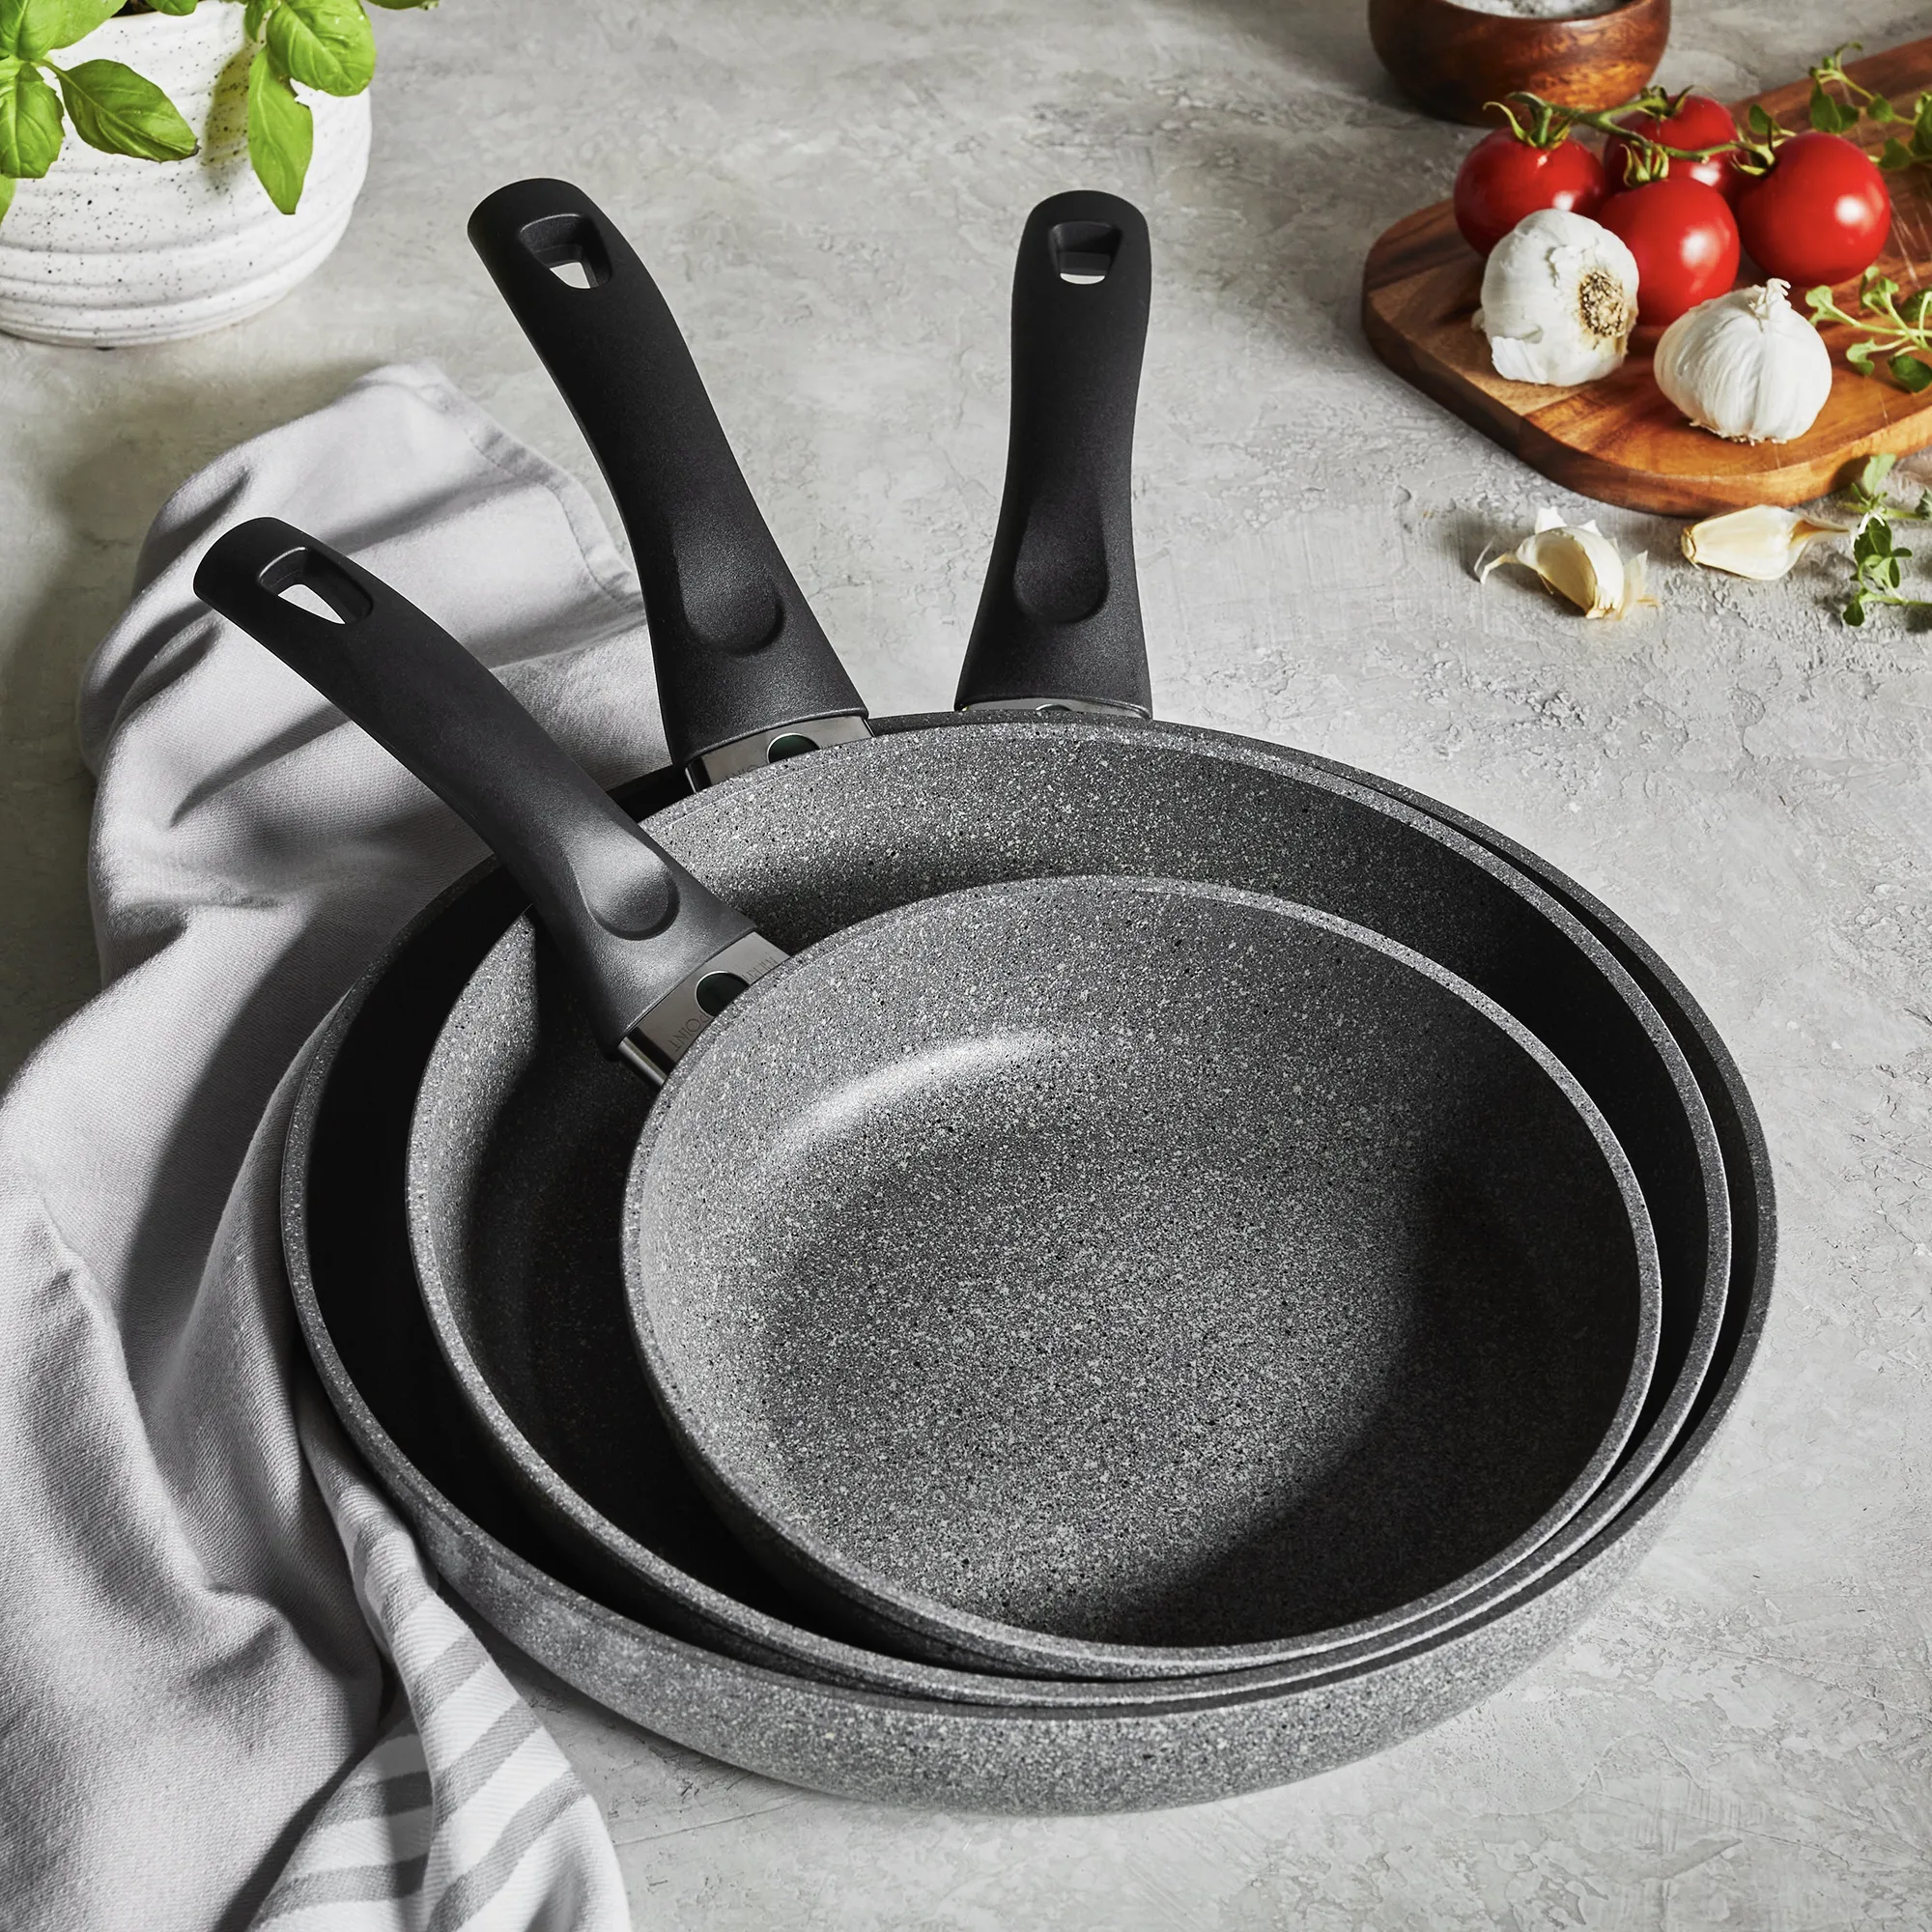 https://www.homethreads.com/files/zwilling/75002-614-ballarini-parma-by-henckels-forged-aluminum-3-pc-nonstick-fry-pan-set-made-in-italy-6.webp